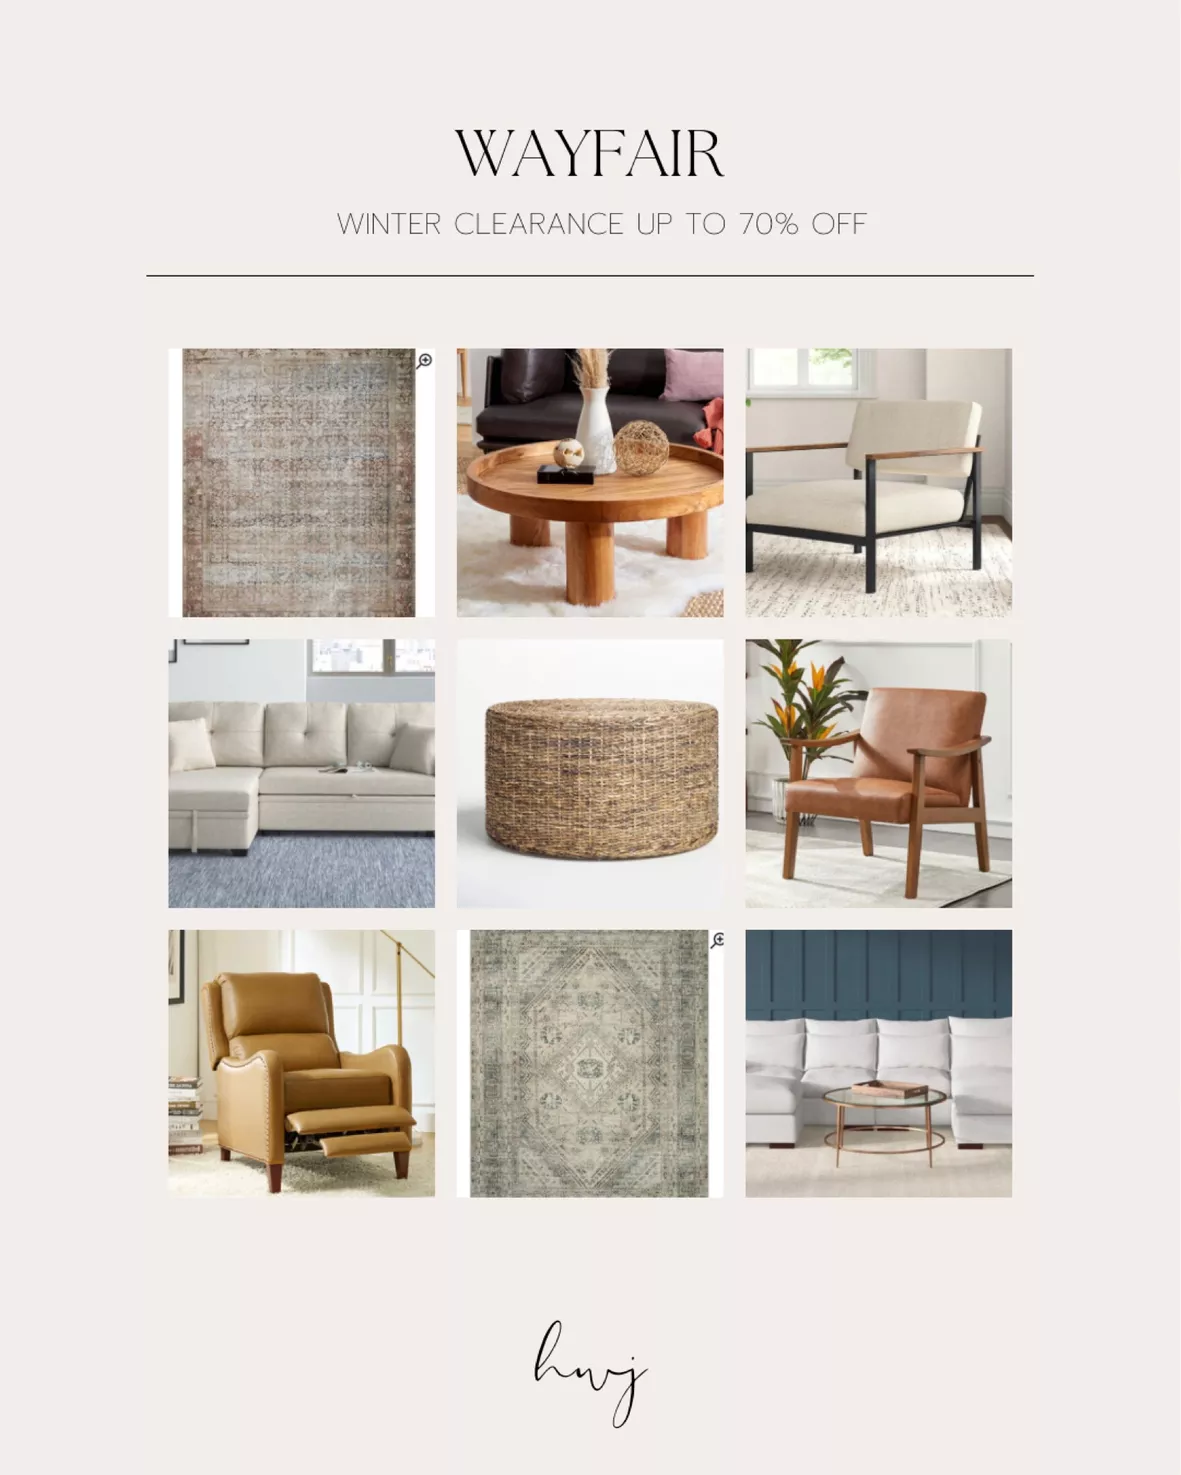 Wayfair Winter Clearance sale: Up to 70% off